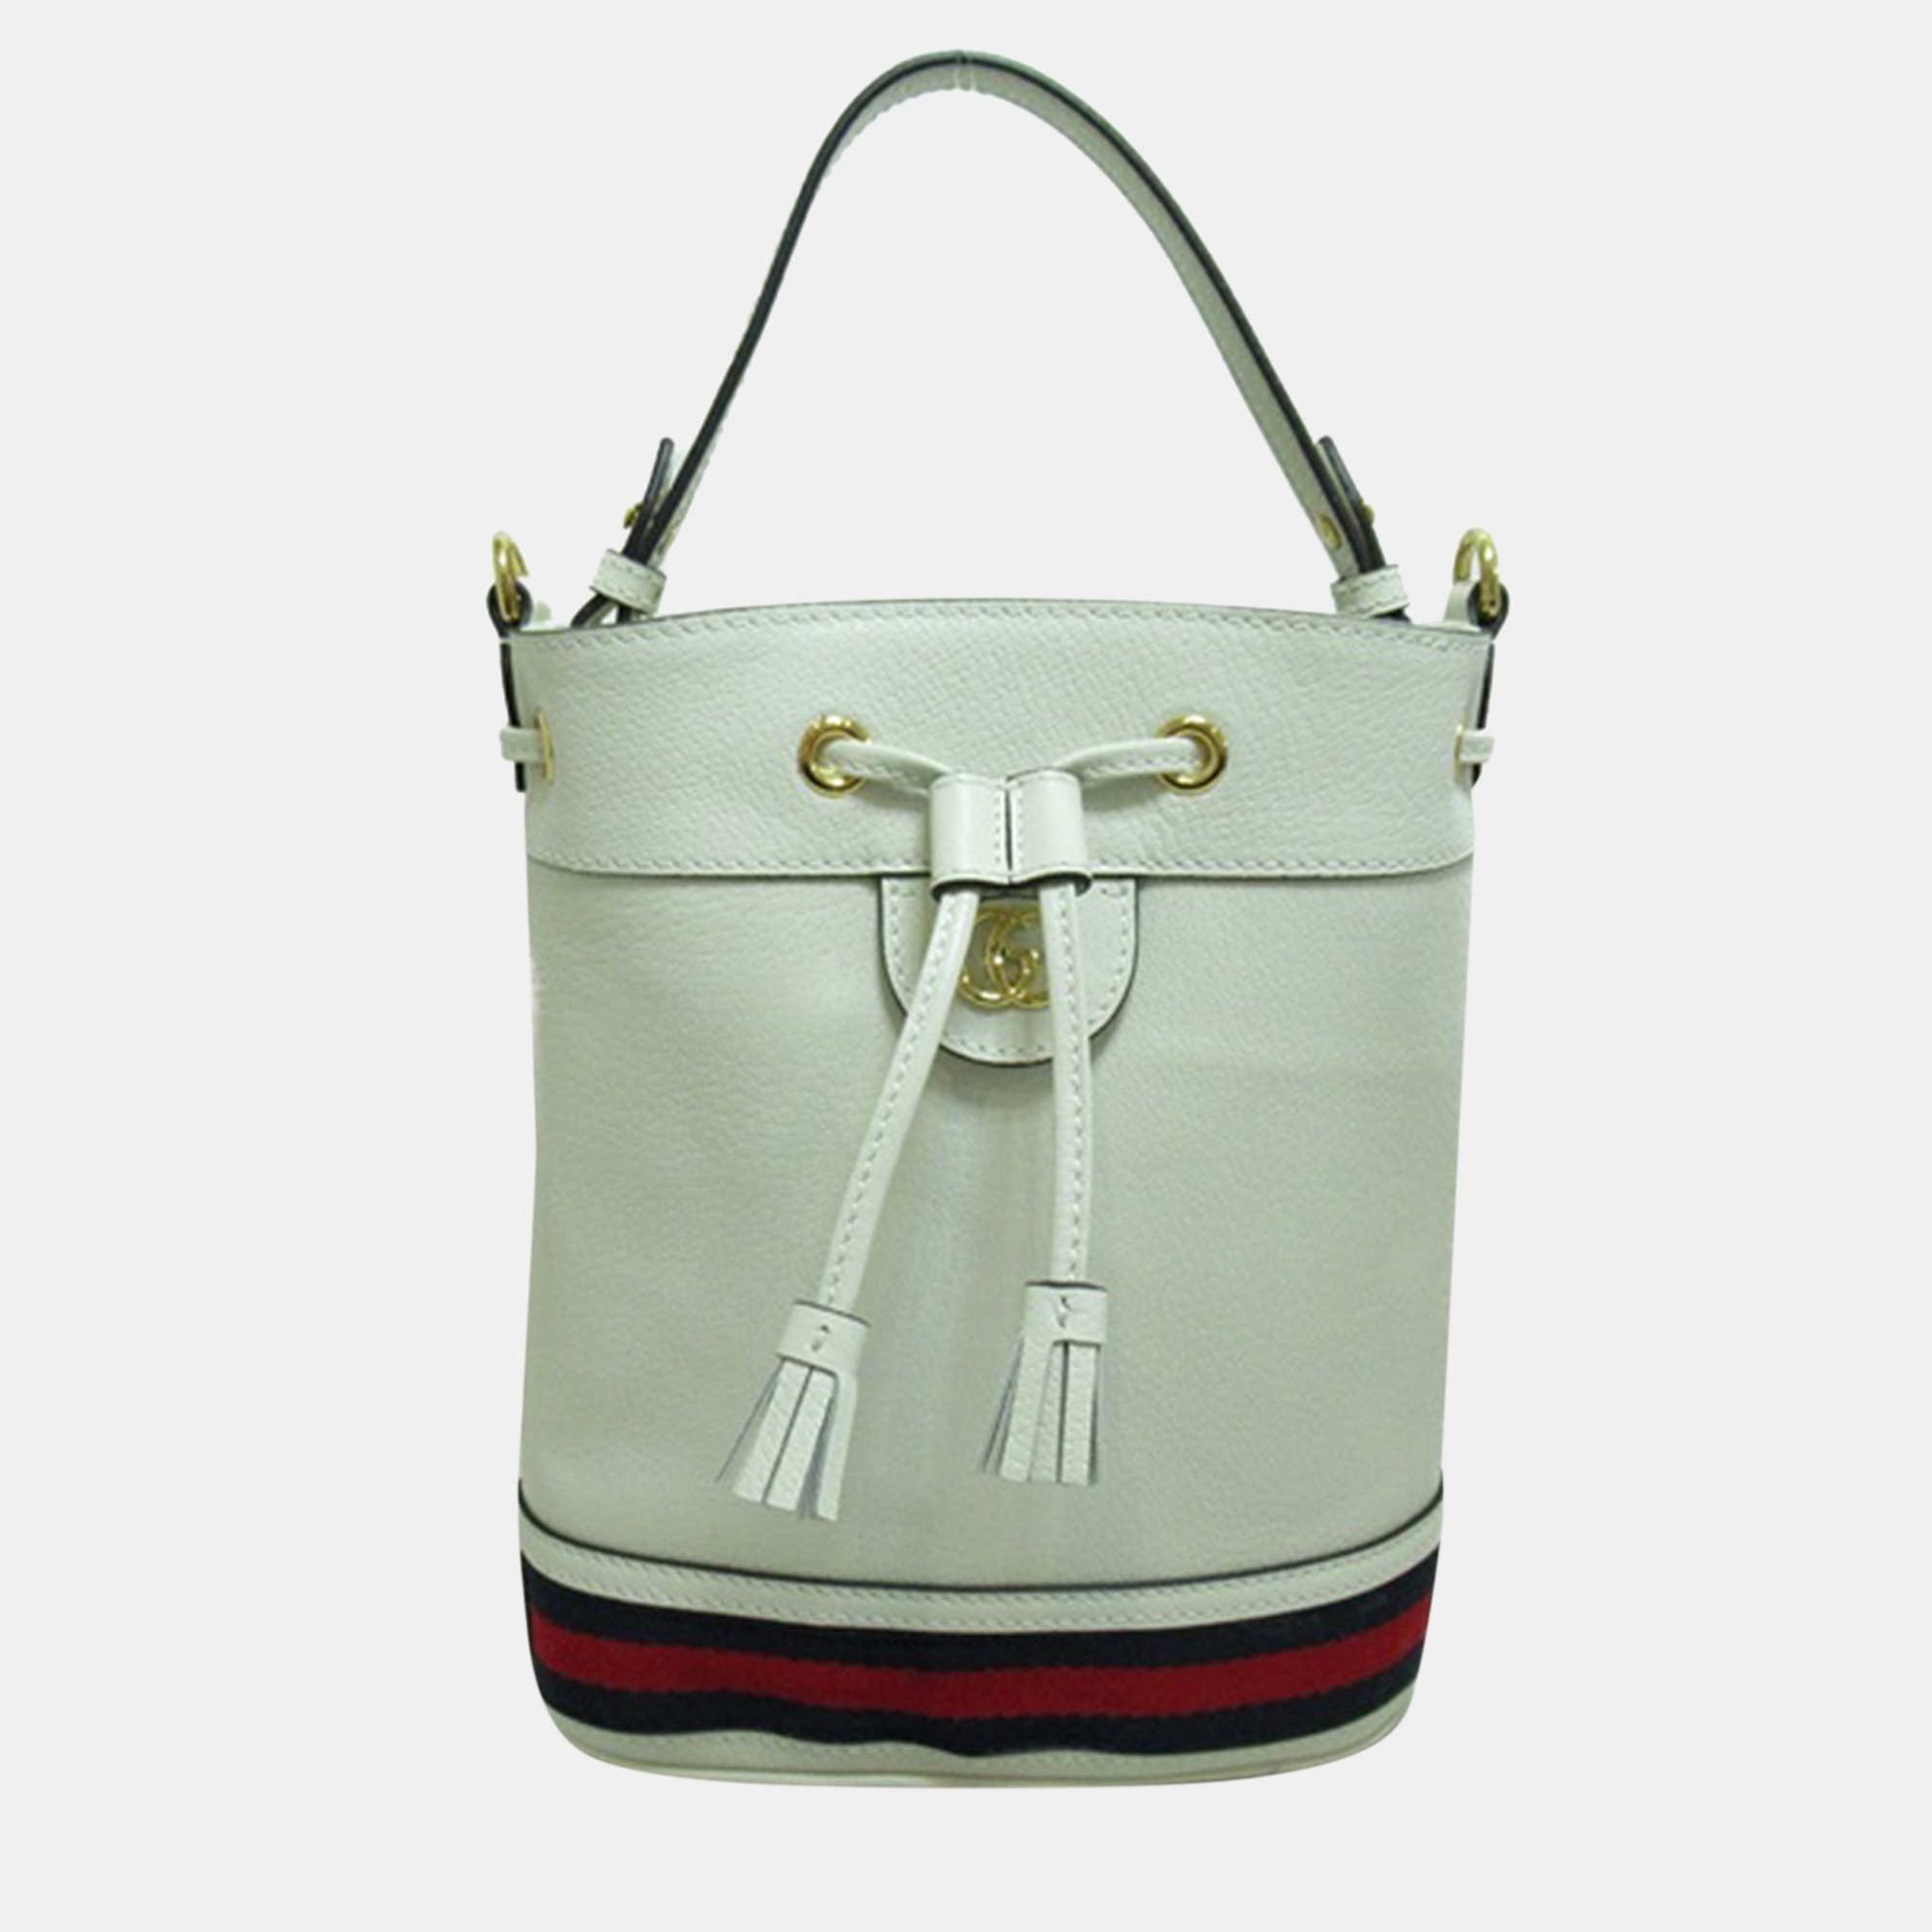 Gucci white leather small ophidia bucket bag